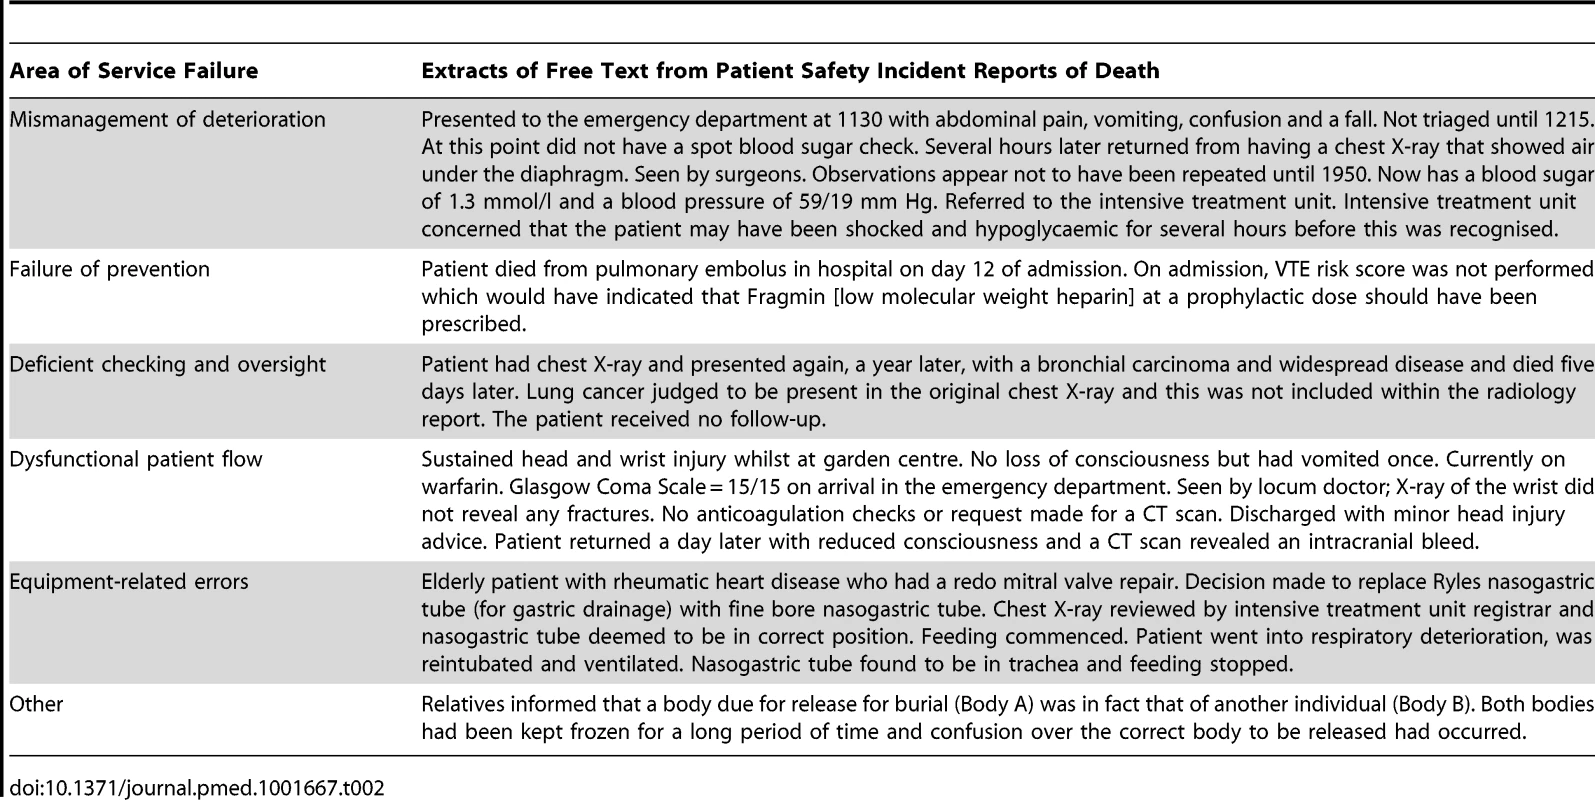 Extracts of free text from patient safety incident reports of death.